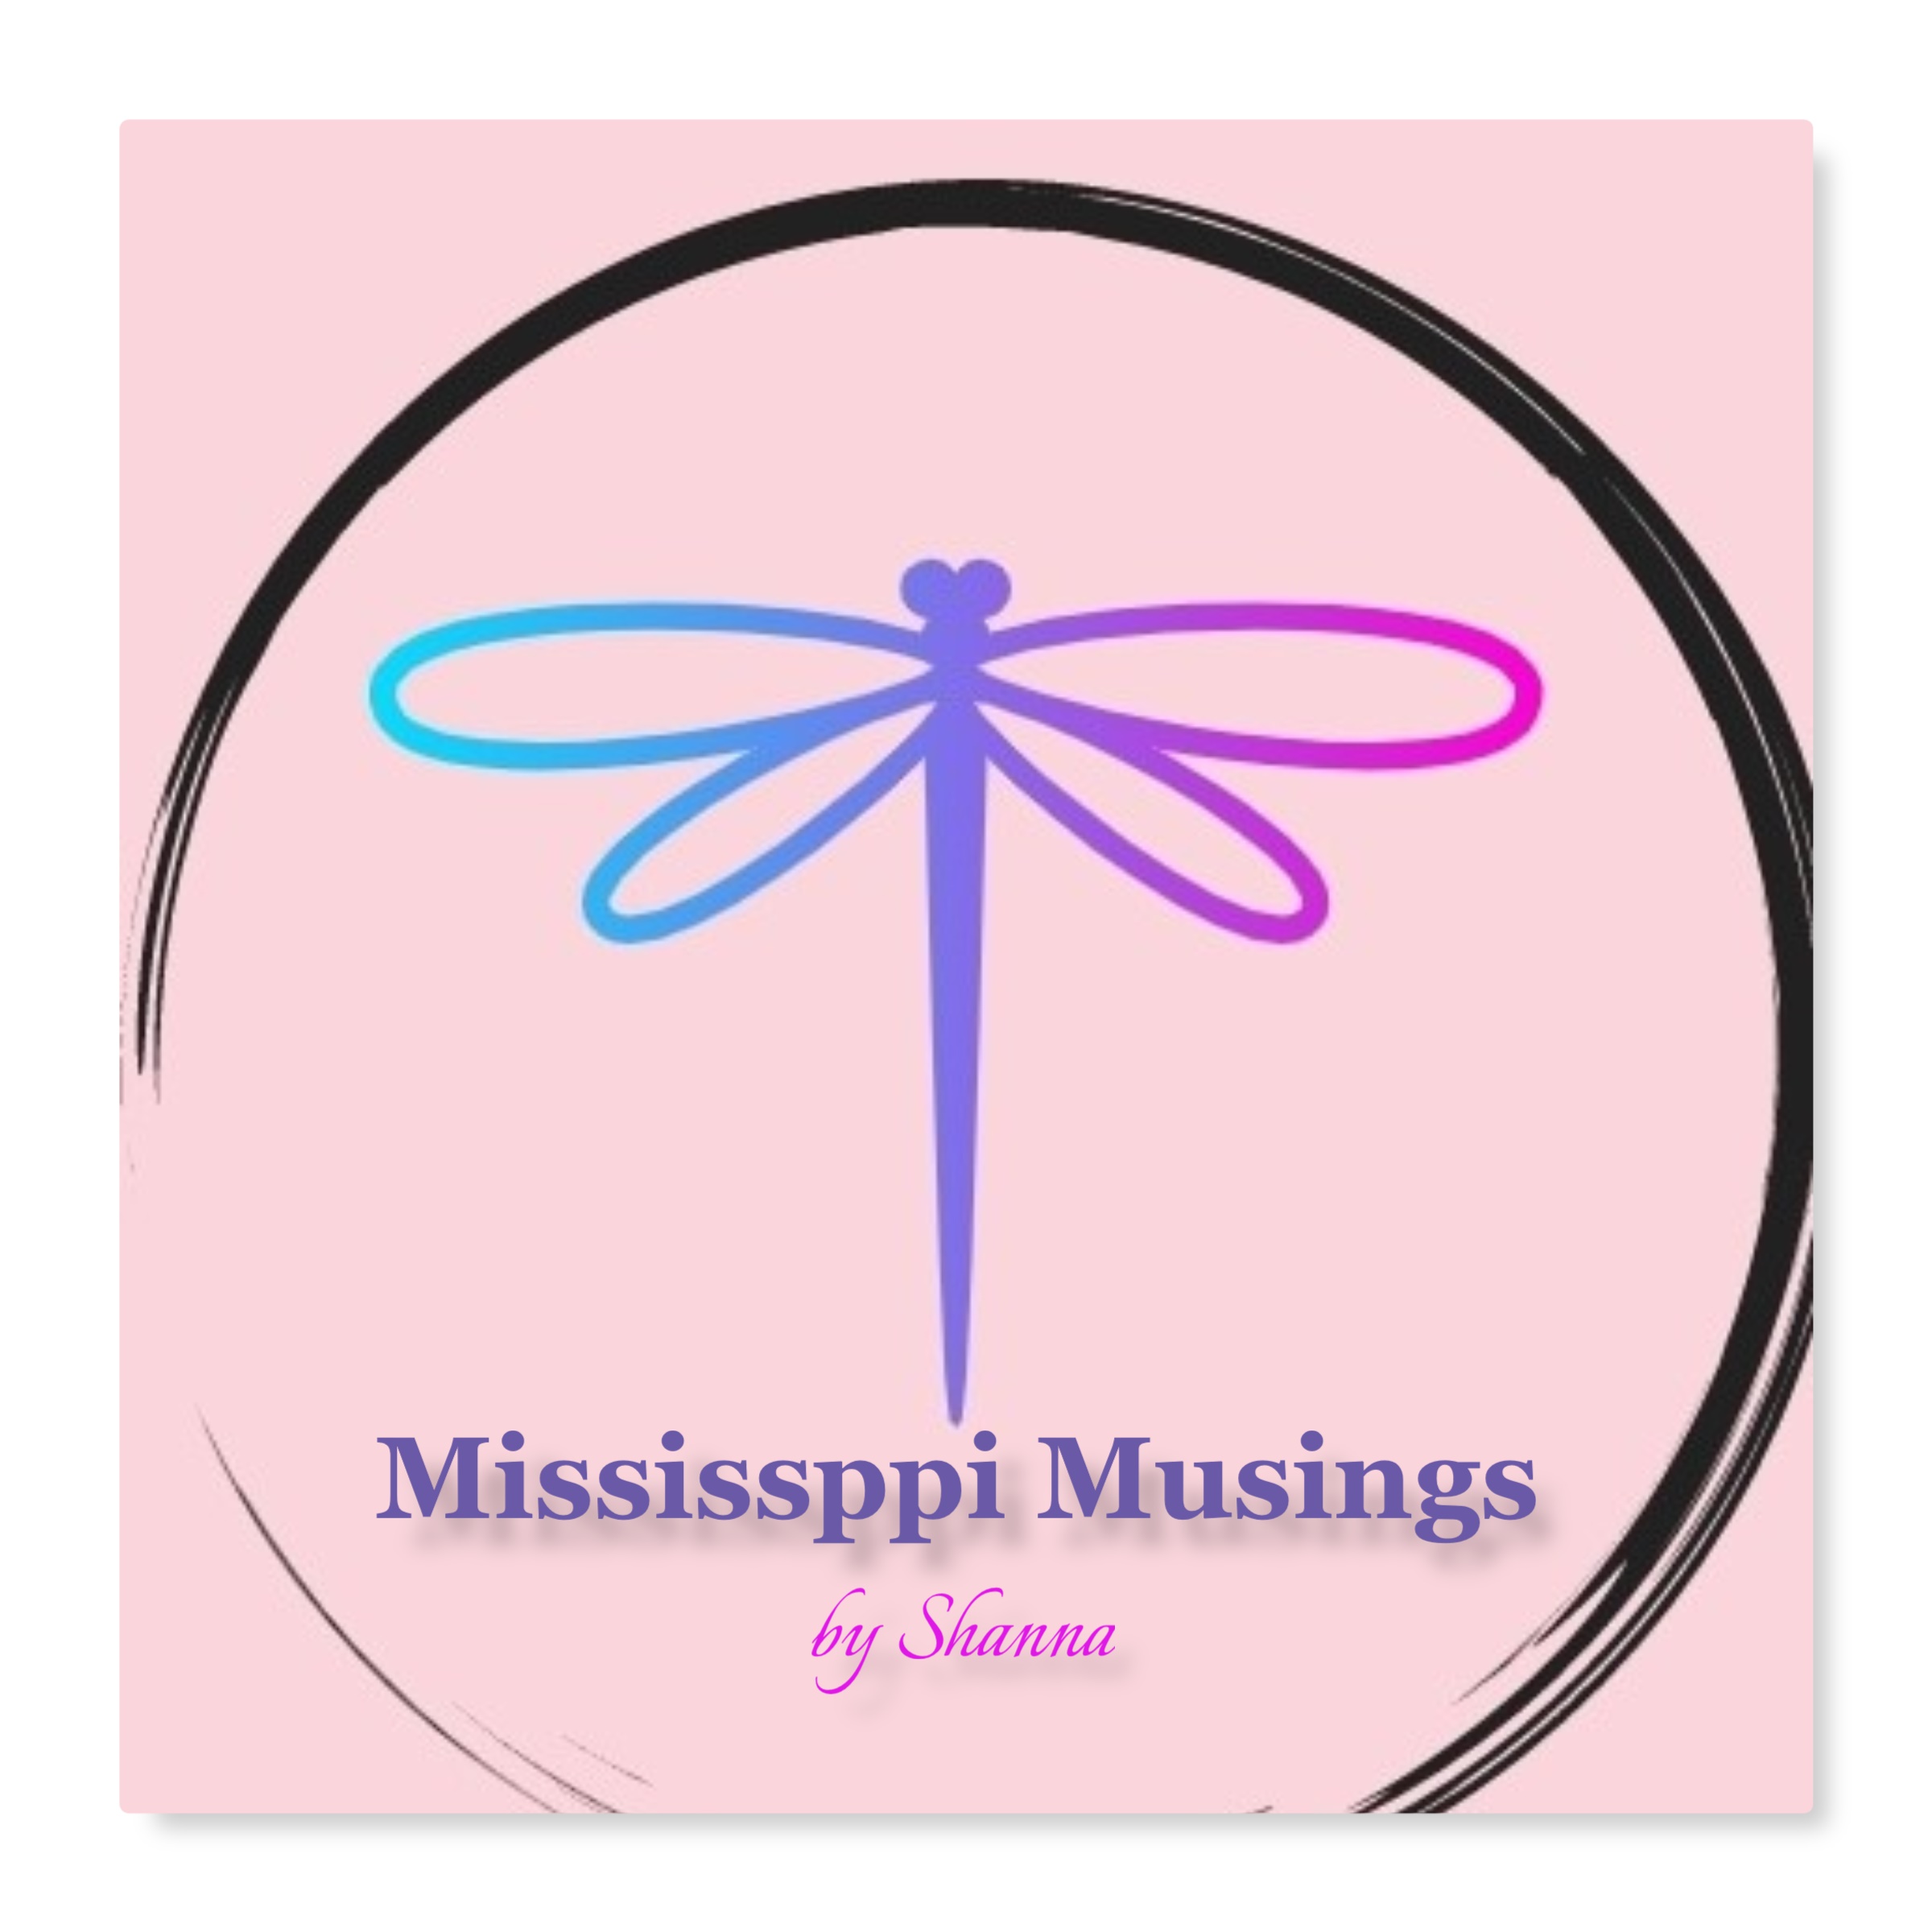 Mississippi Musings by Shanna